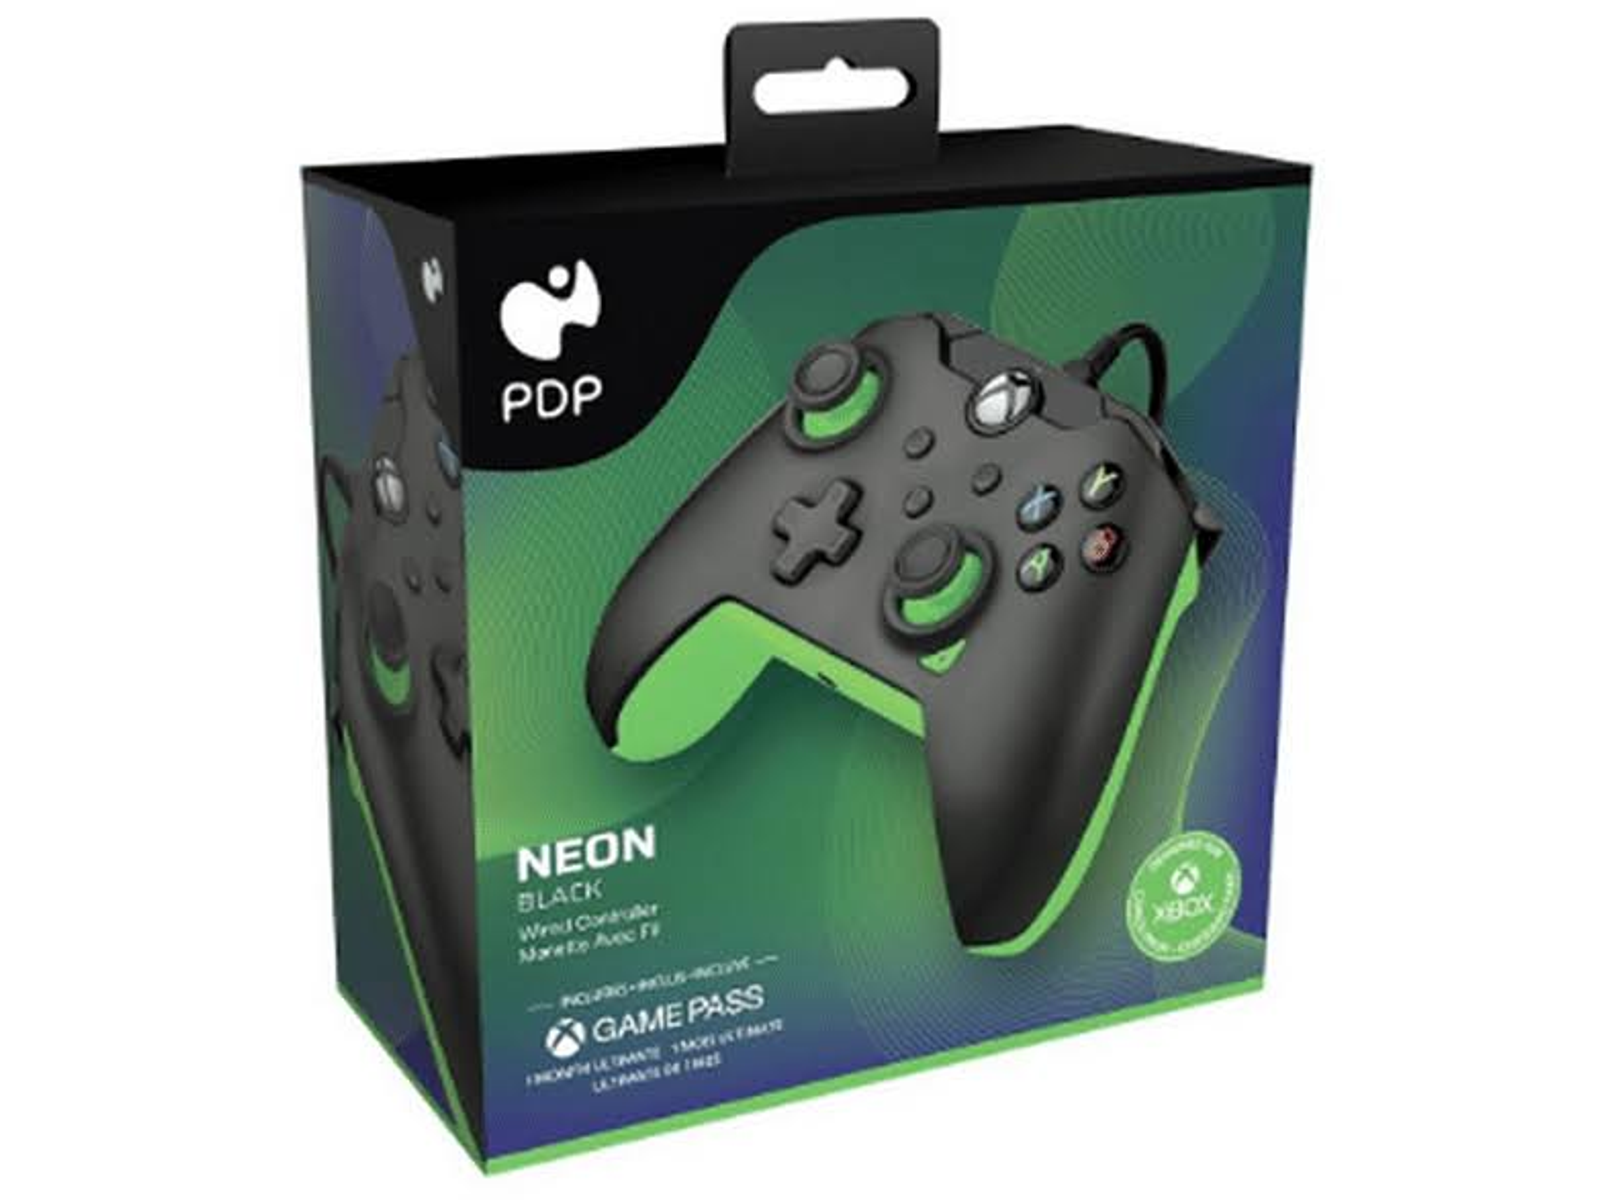 PDP Black NEON WIRED BLACK 049-012-GG Controller Neon